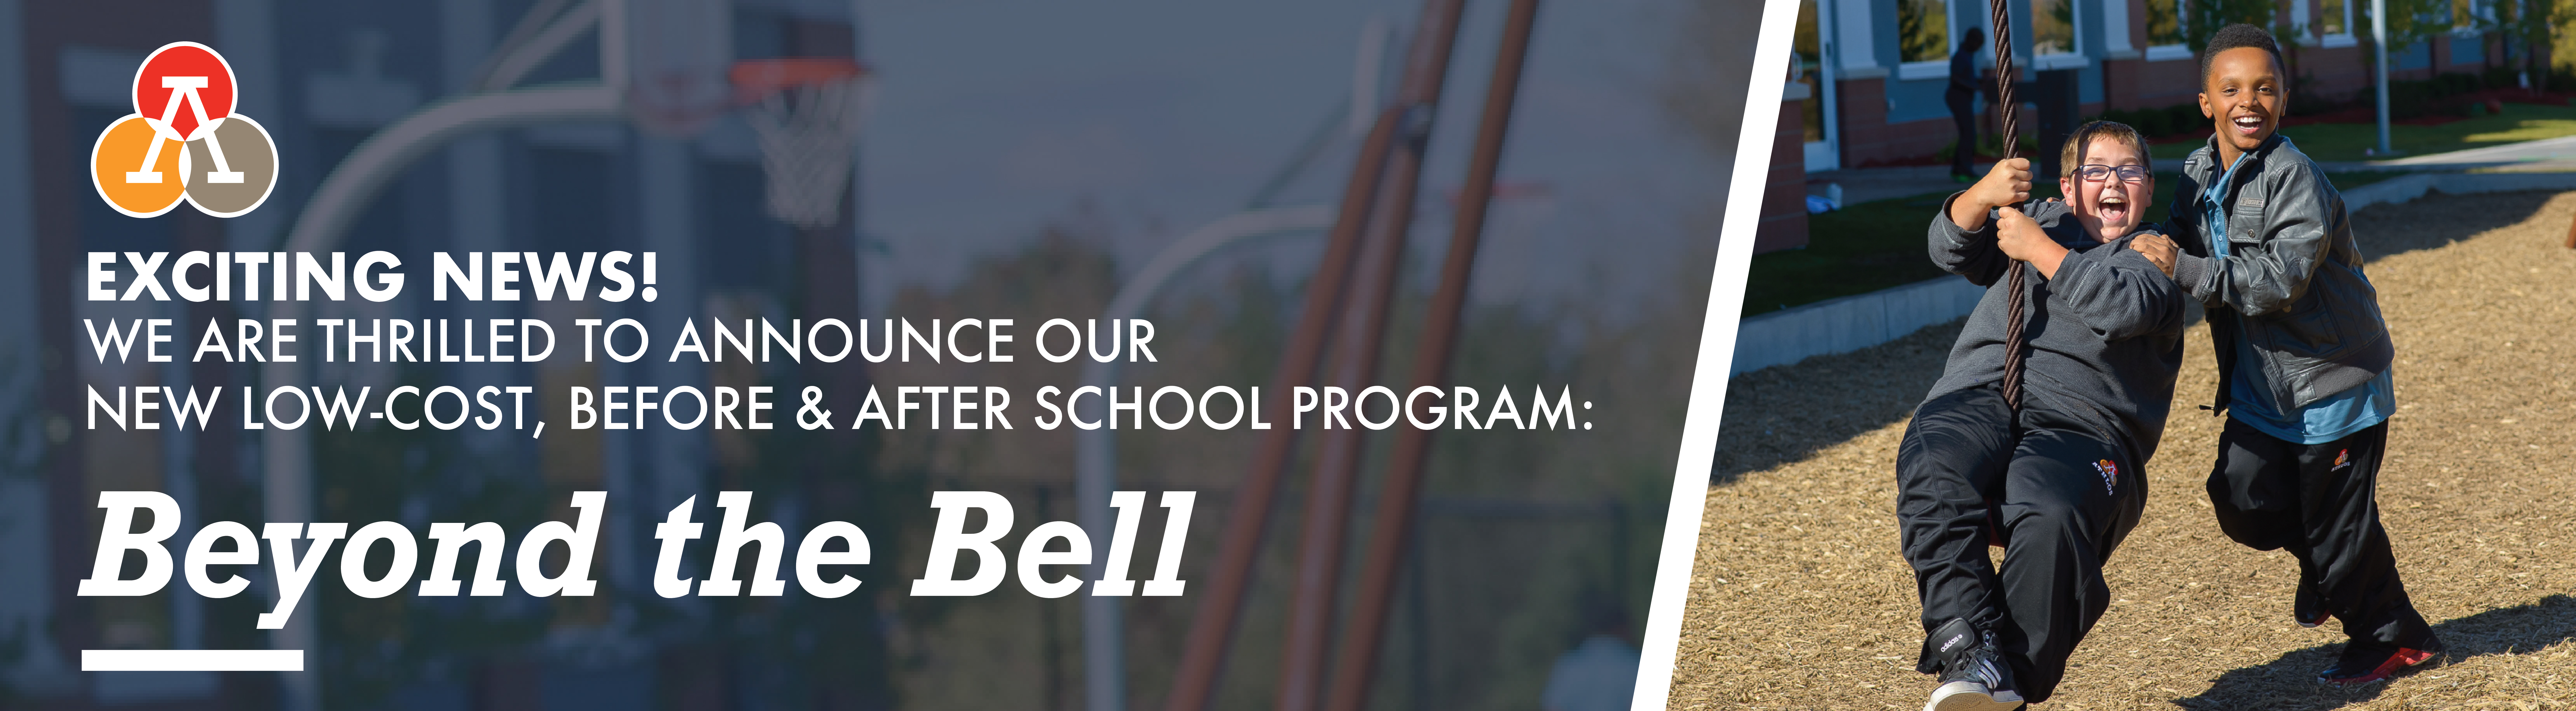 Beyond the Bell before and after school program